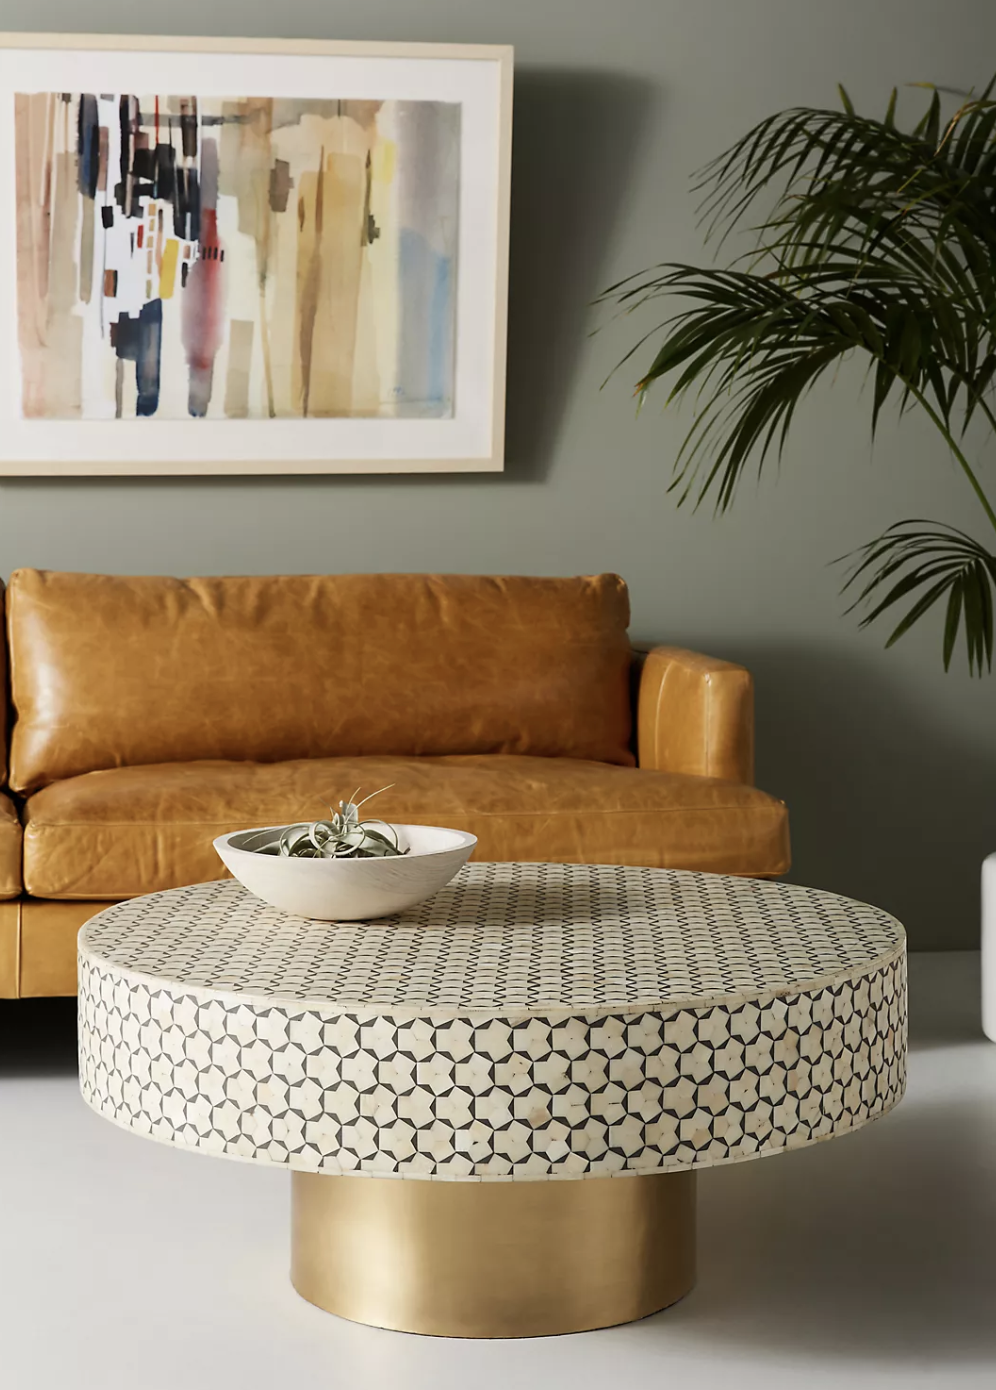 the coffee table with a gold-tones base and patterned table